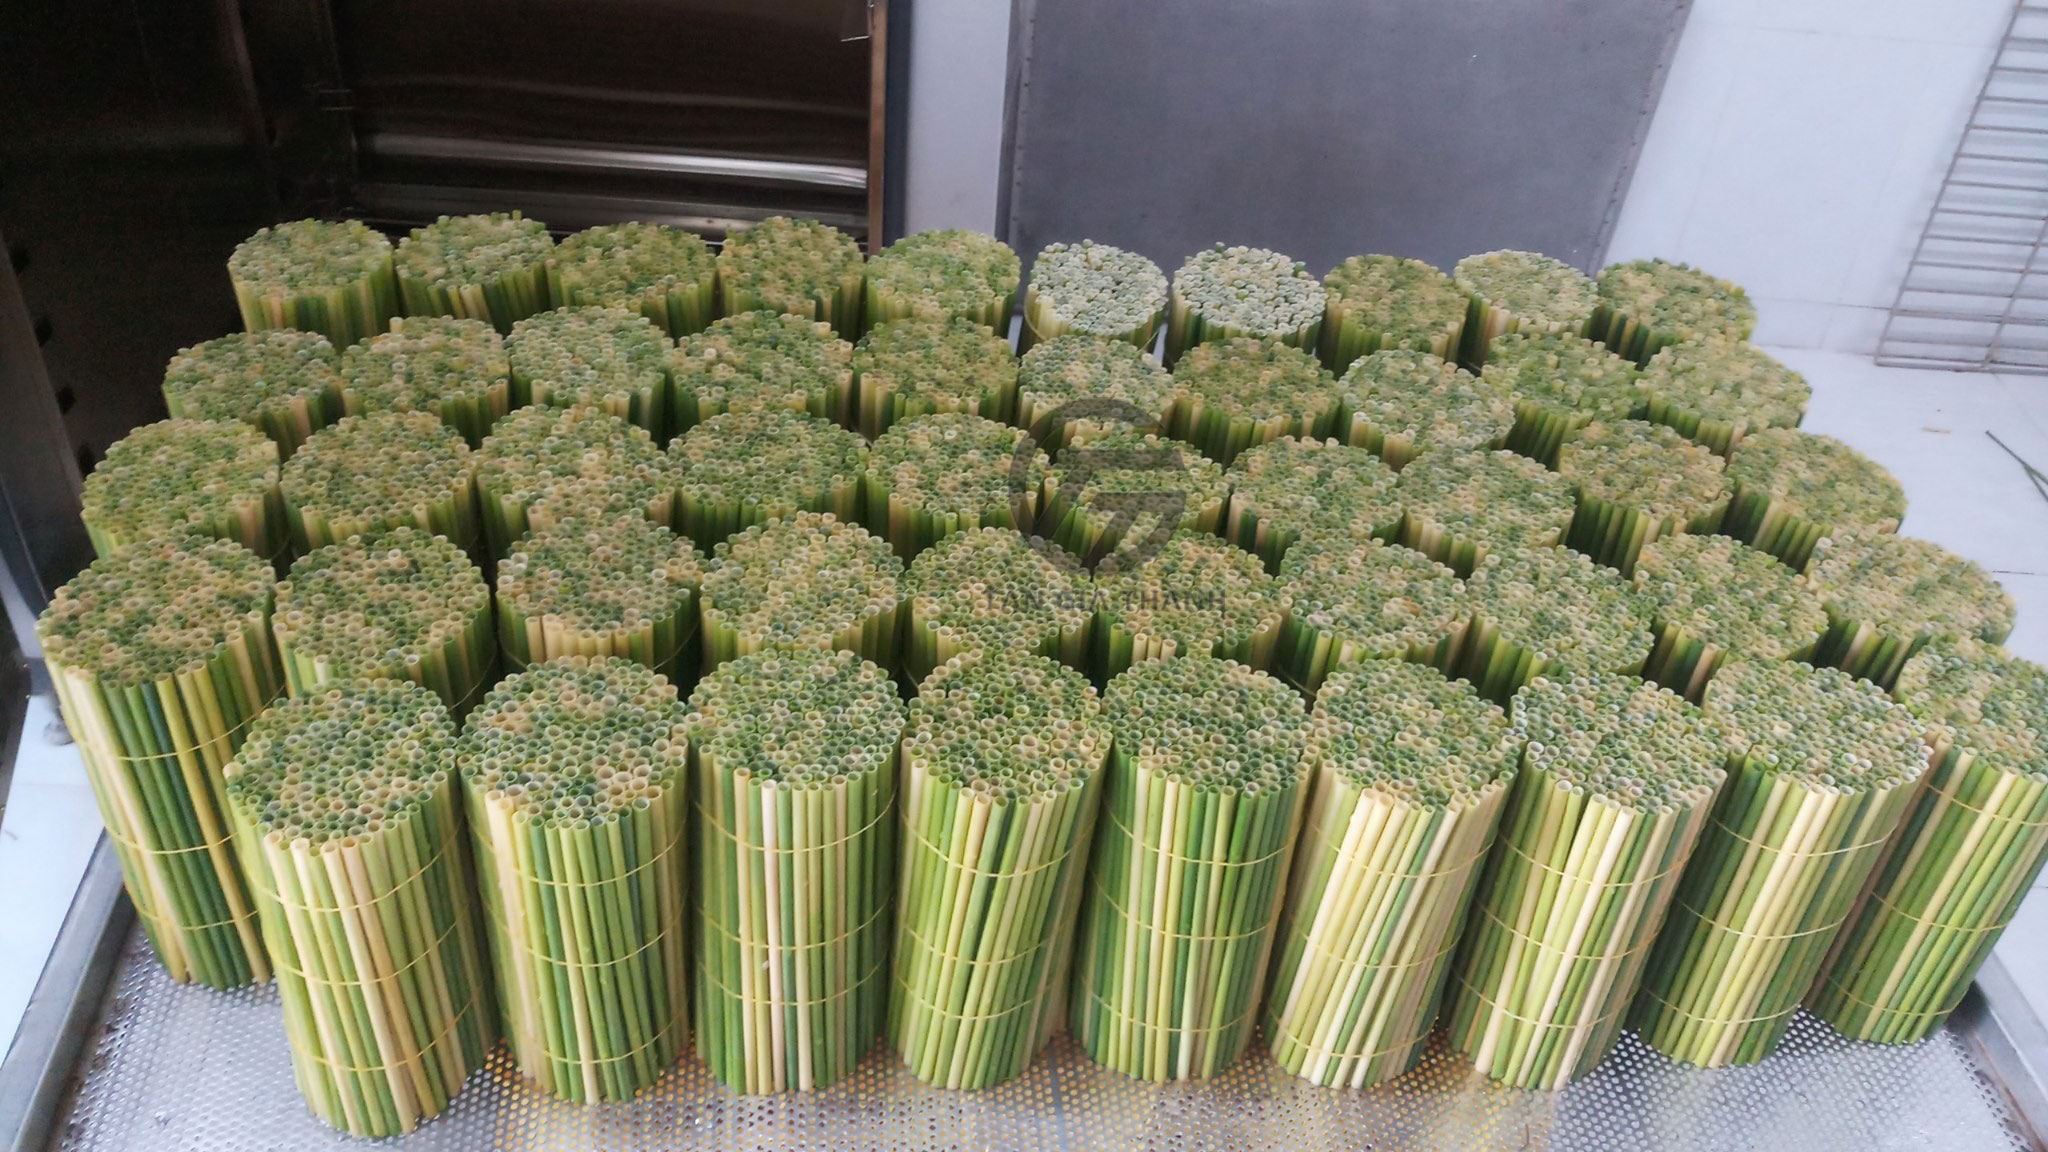 Tan Gia Thanh is a reputable supplier where to buy natural grass straws in Vietnam